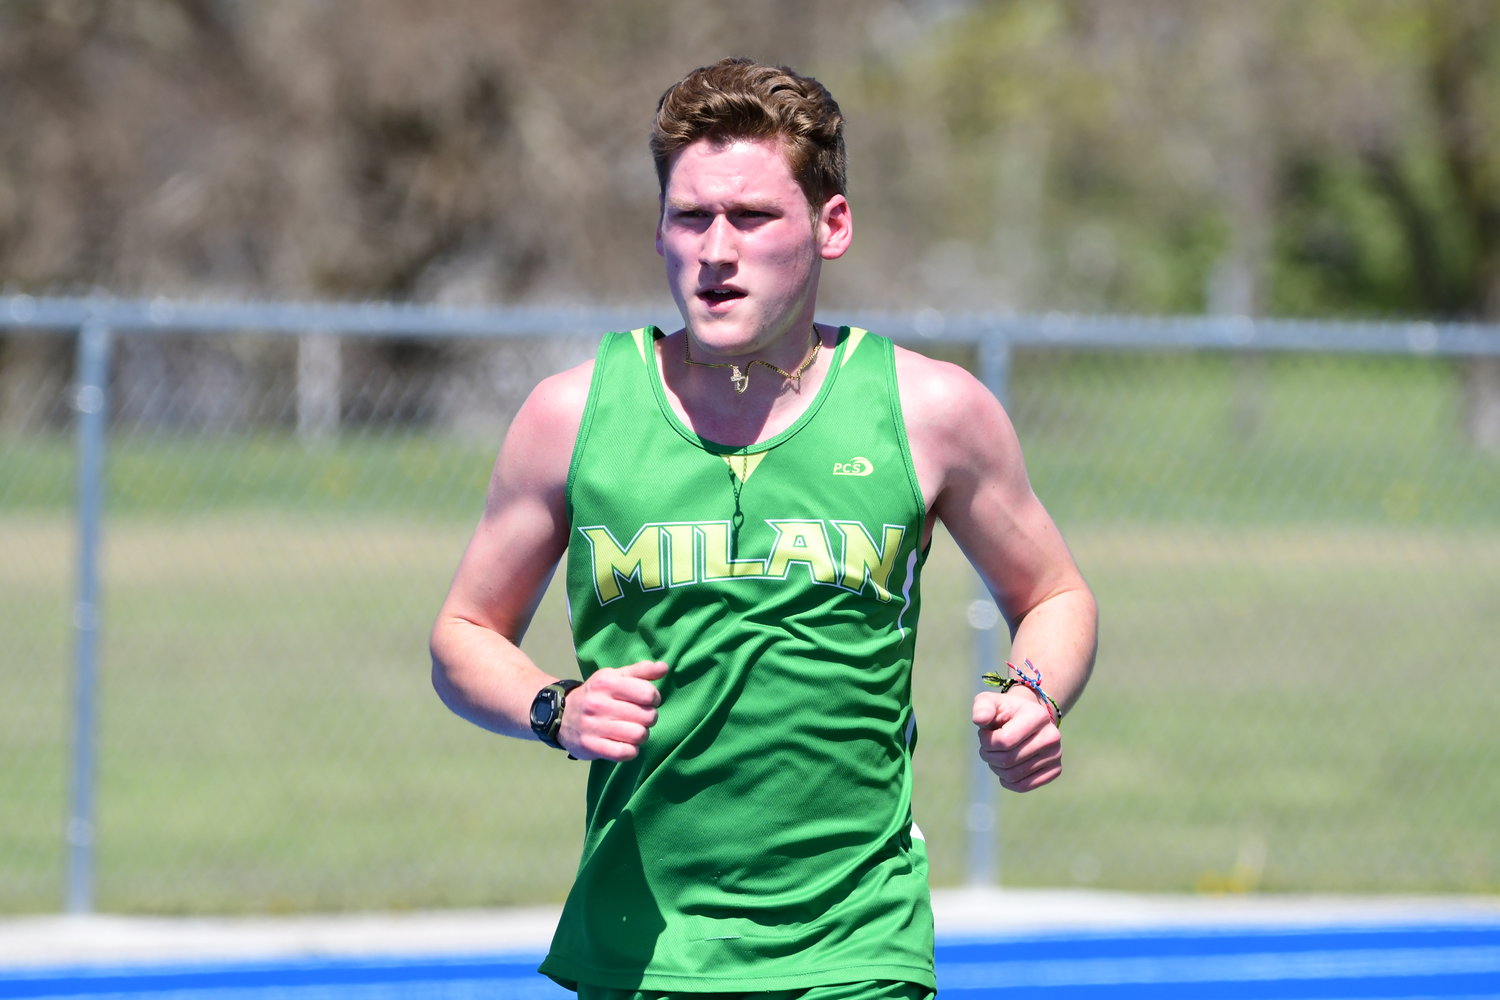 Milan's Nathan Keck runs in the 3200m at Saturday's Class 2 District 3 meet.